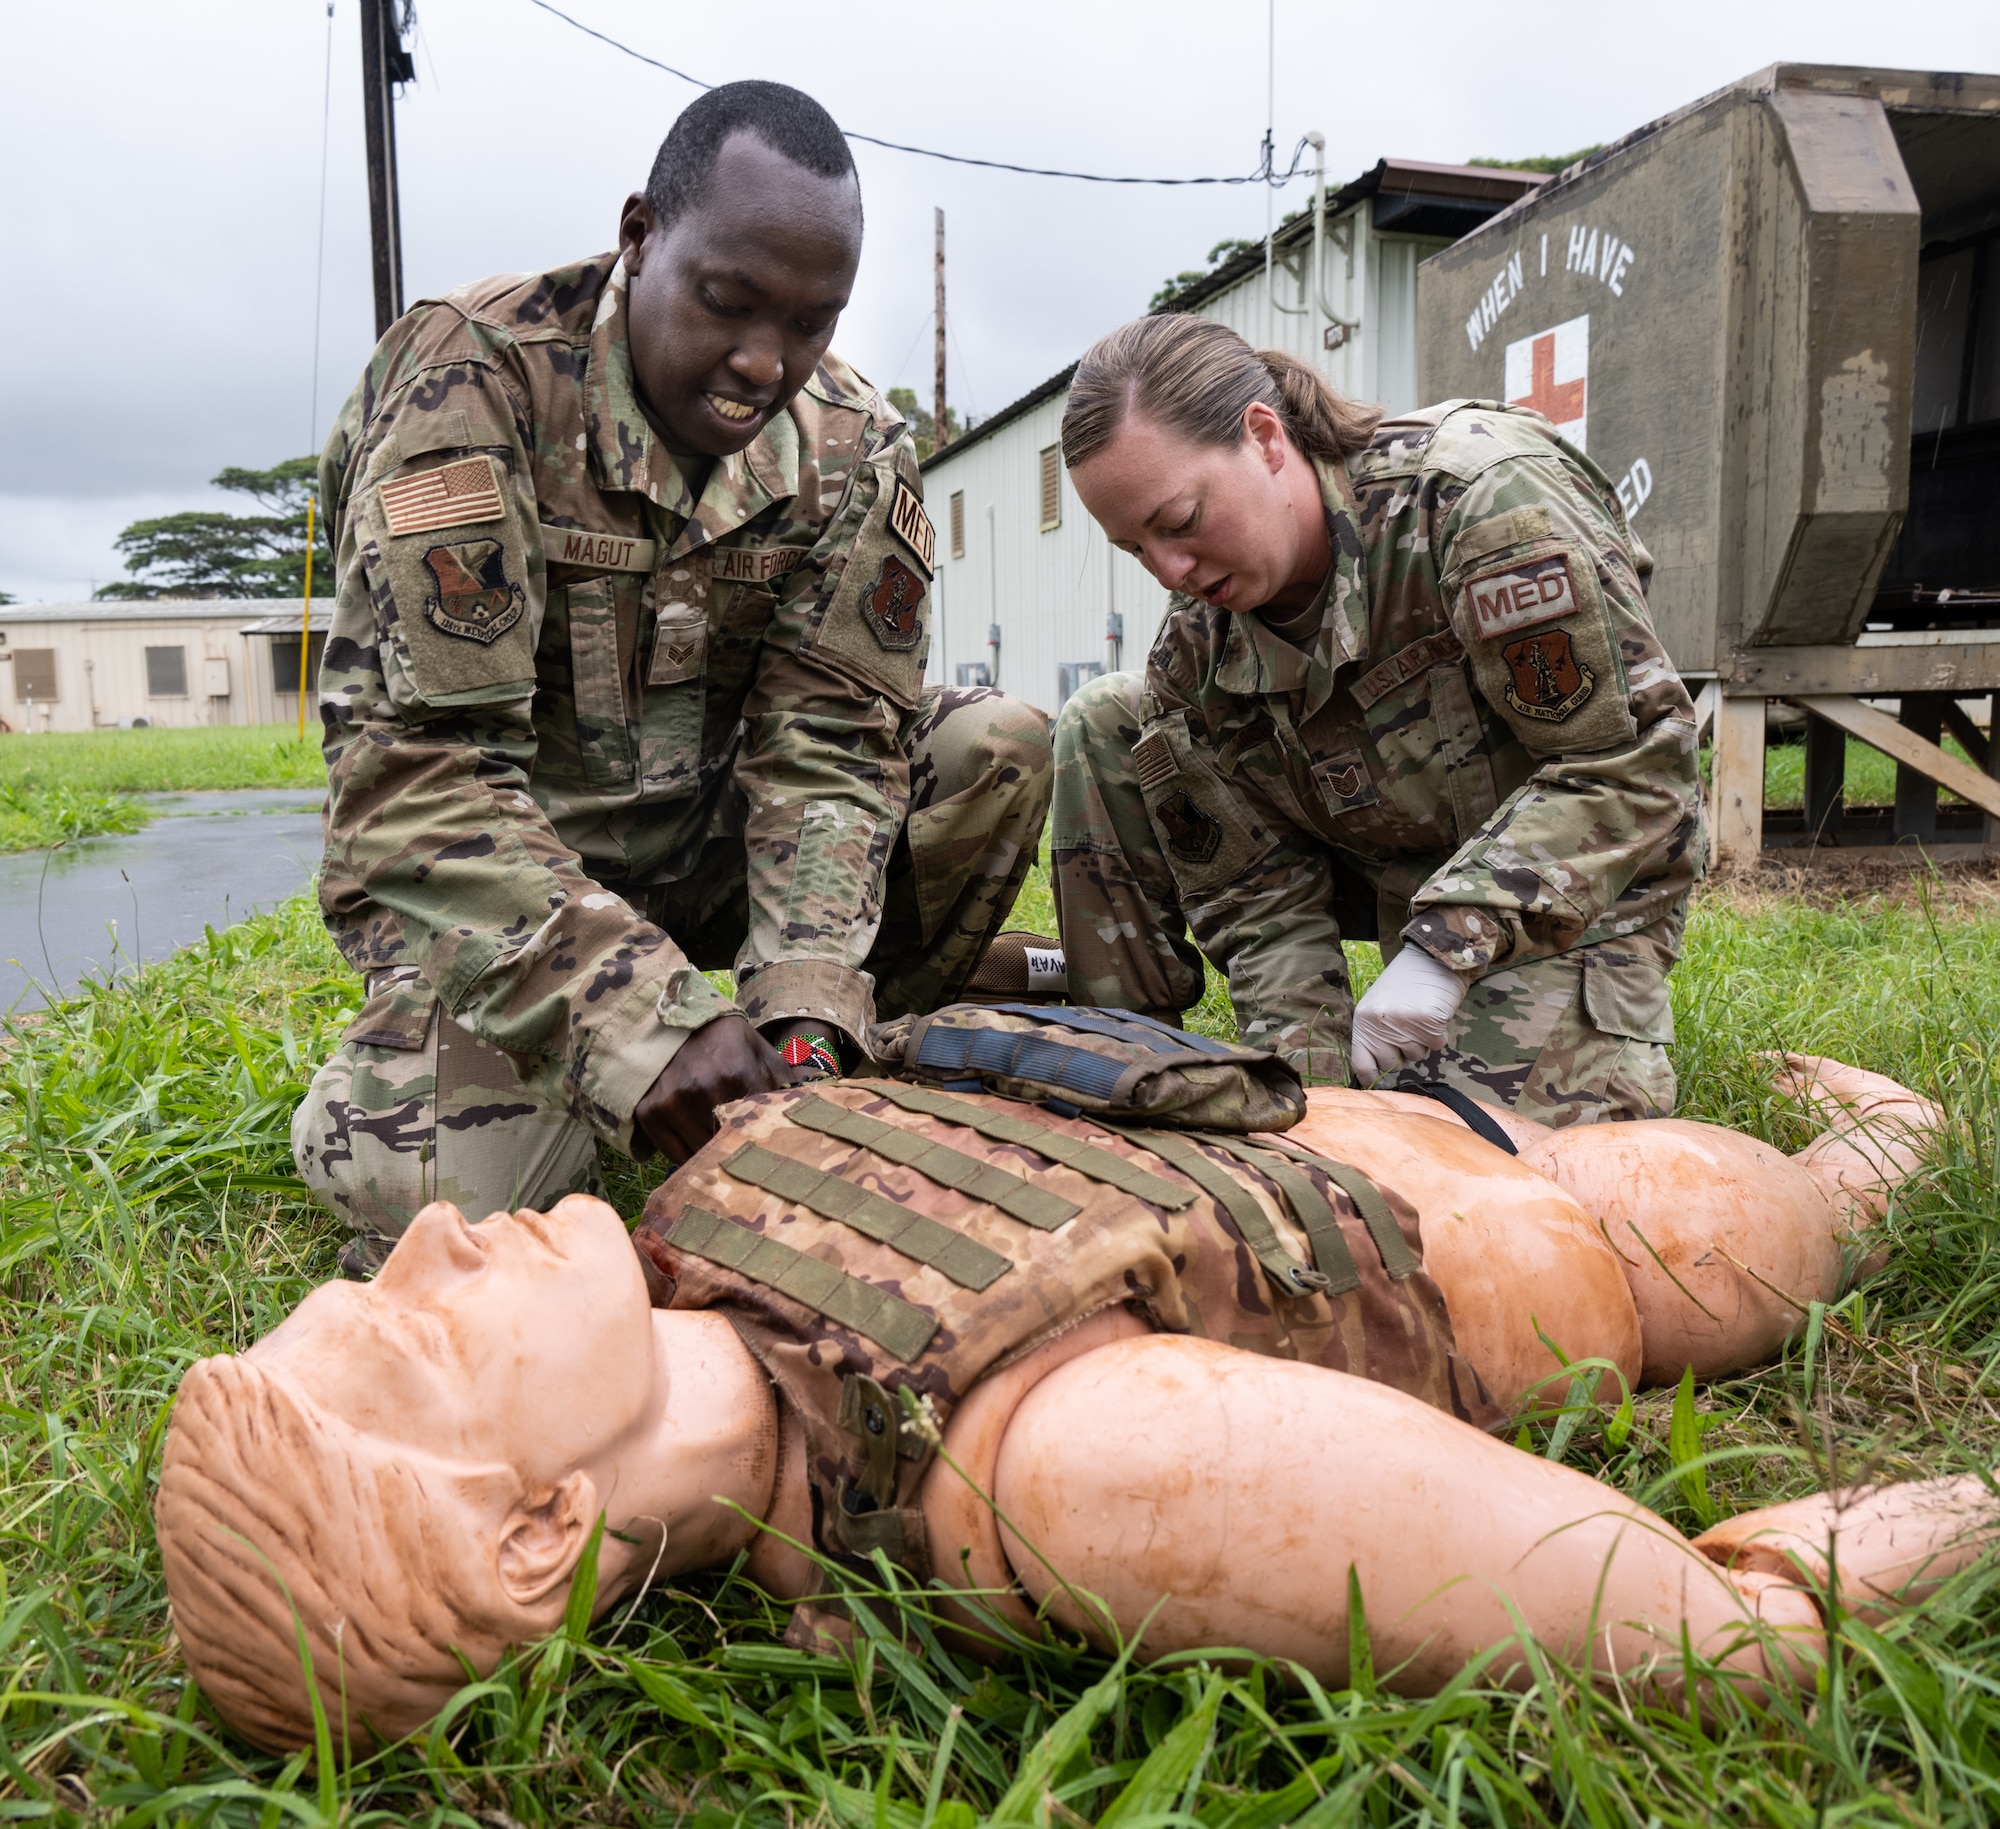 Tech. Sgt. Amanda Nichols and Senior Airman Magut Abednego, both 136th Airlift Wing aerospace medical technicians, apply emergency care to a medical grade mannequin during training at U.S. Army Installation Schofield Barracks in Hawaii May 18, 2023.